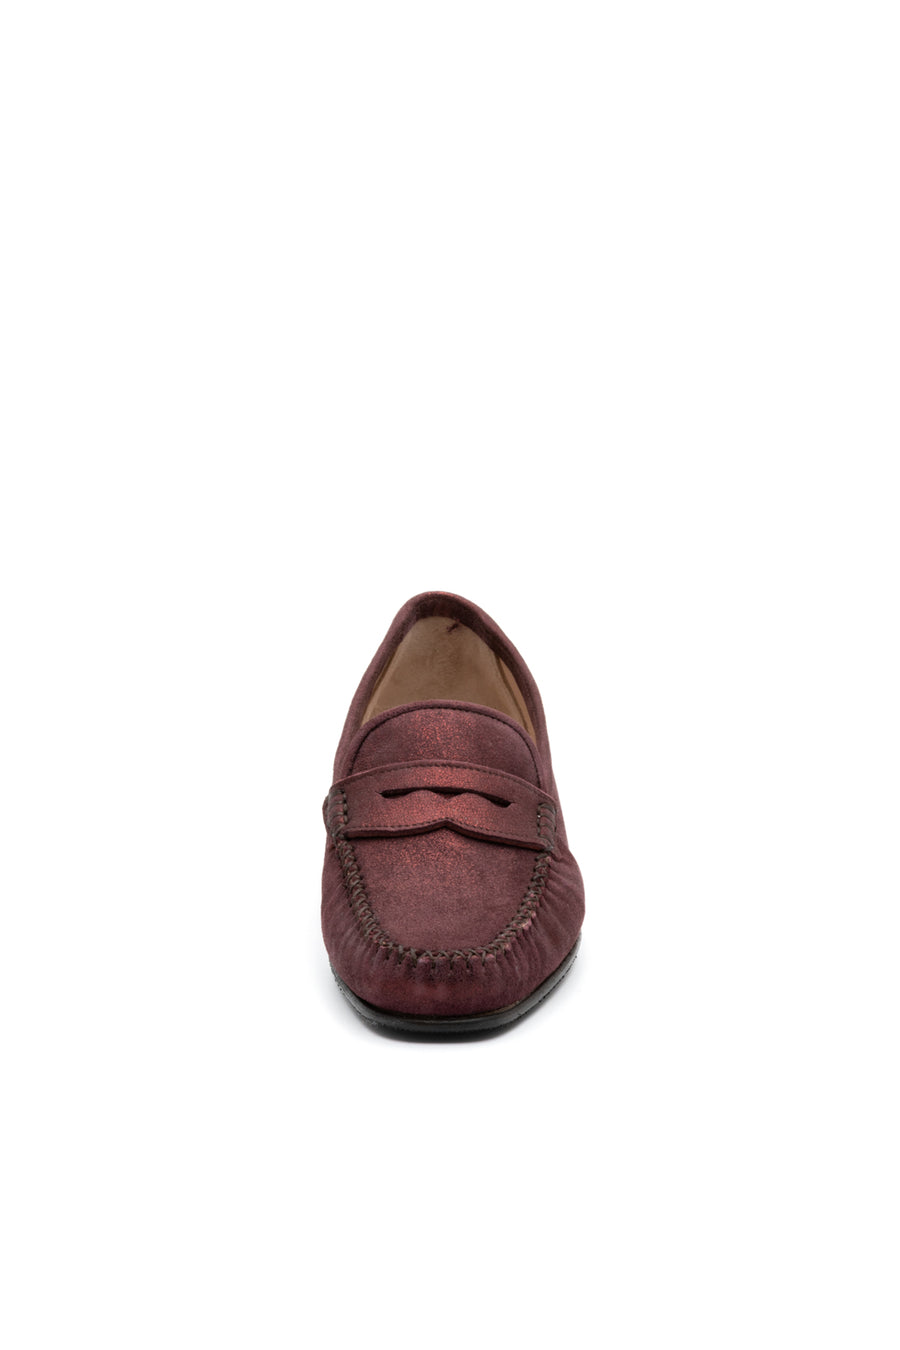 GIA Pascucci Loafer